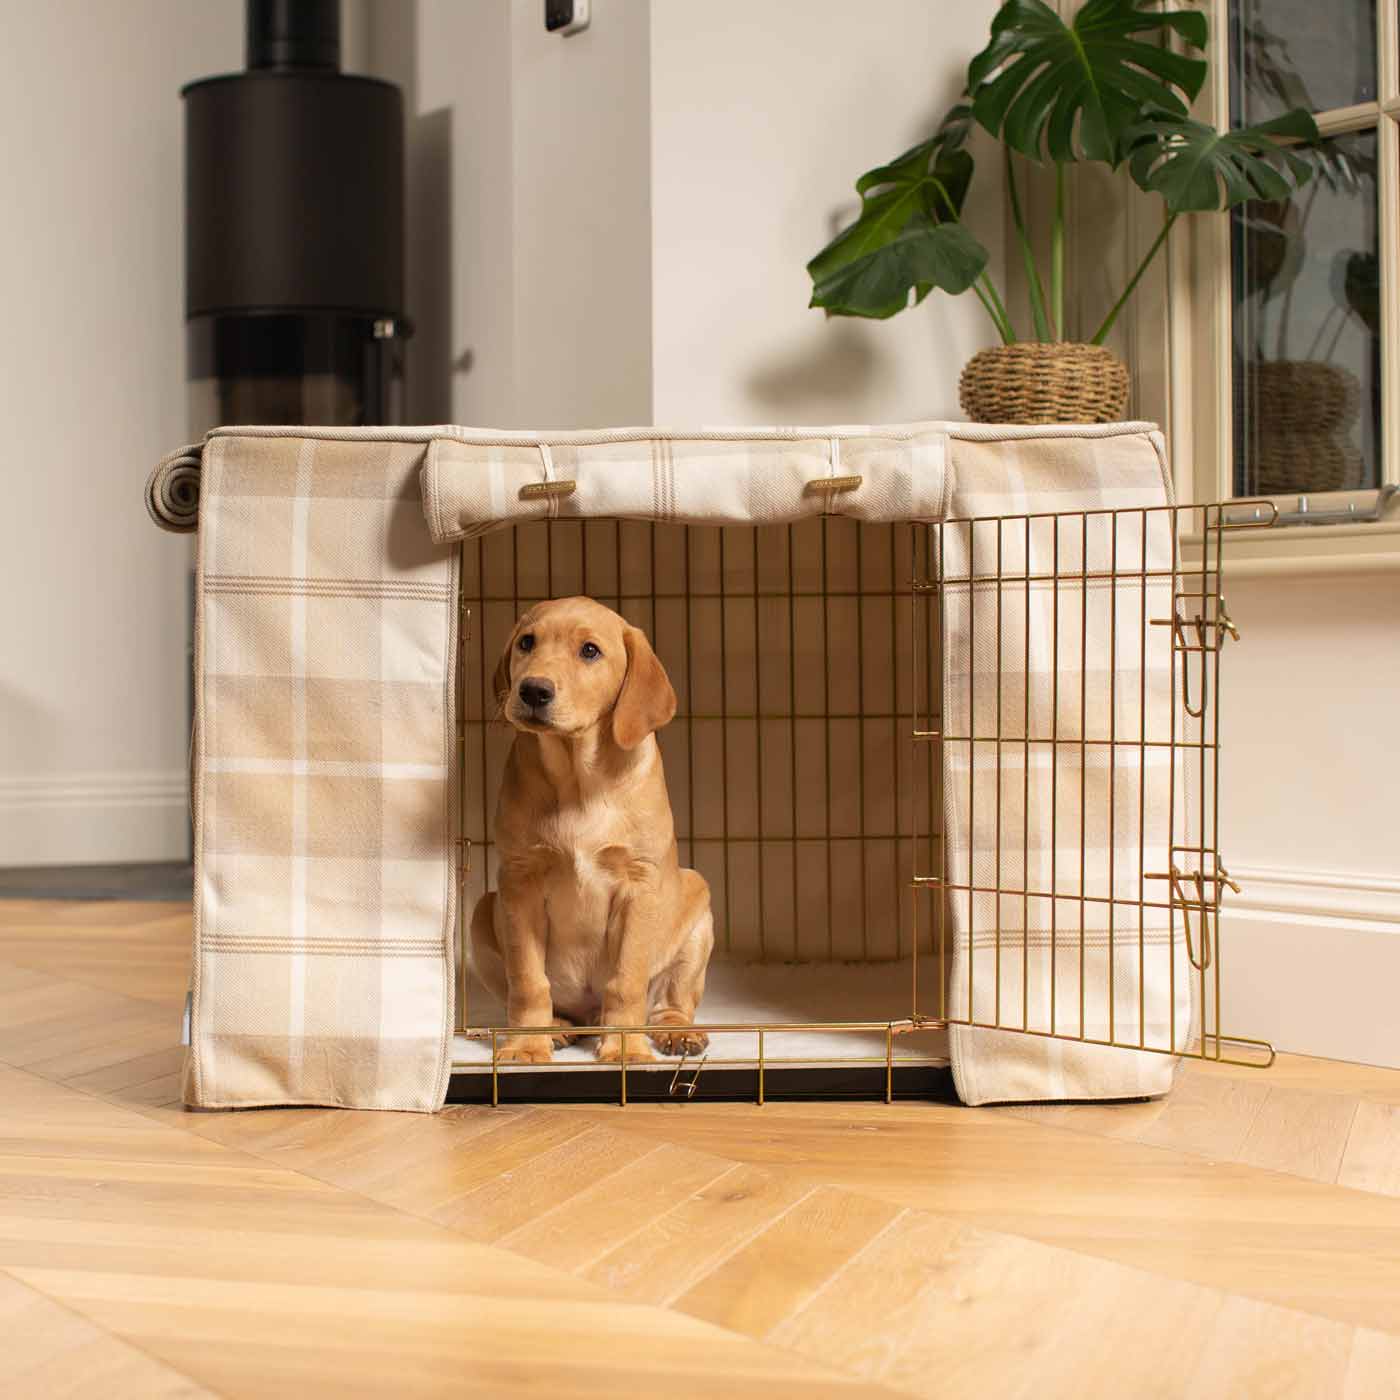 Discover Our Heavy-Duty Dog Crate With Natural Tweed Crate Cover The Perfect Crate Accessory For The Ultimate Pet Den. Available To Personalise Here at Lords & Labradors 